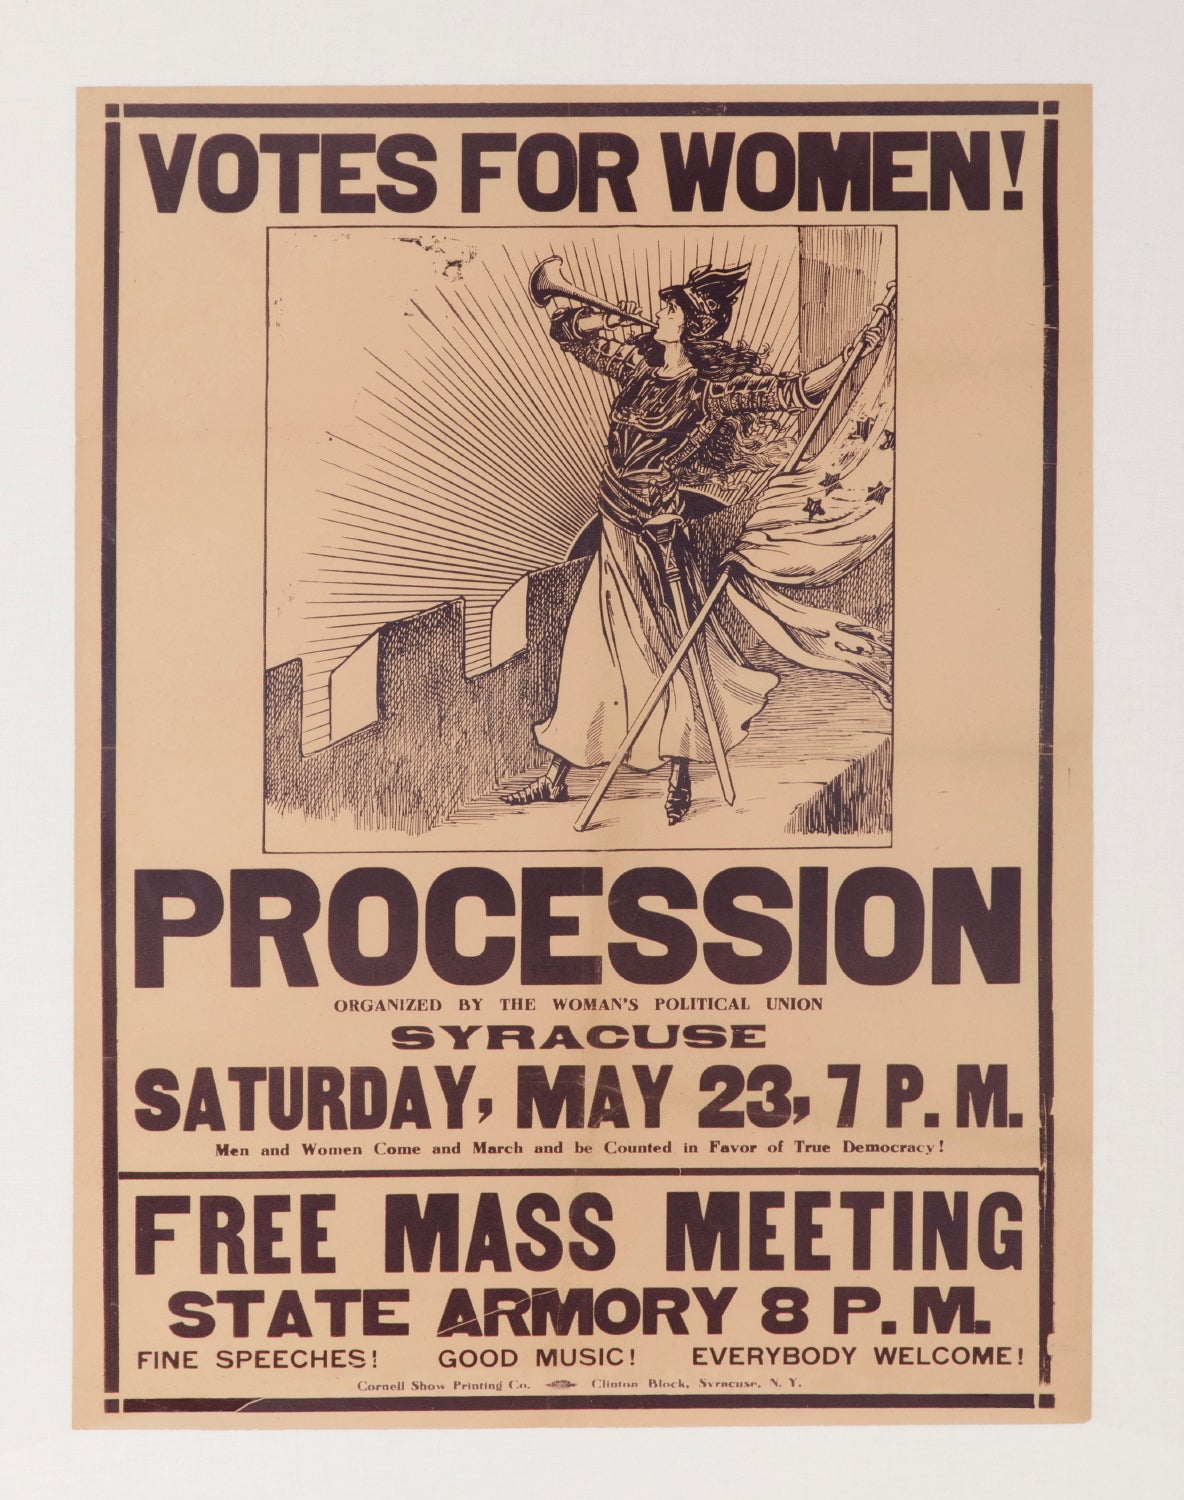 Rare Suffragette Broadside Advertising A 1914 March and Subsequent Rally in Syracuse, New York Organized by the NYC-Based Women's Political Union, the Only Known Example in this Style:

Suffragette broadside, printed in deep violet on a white